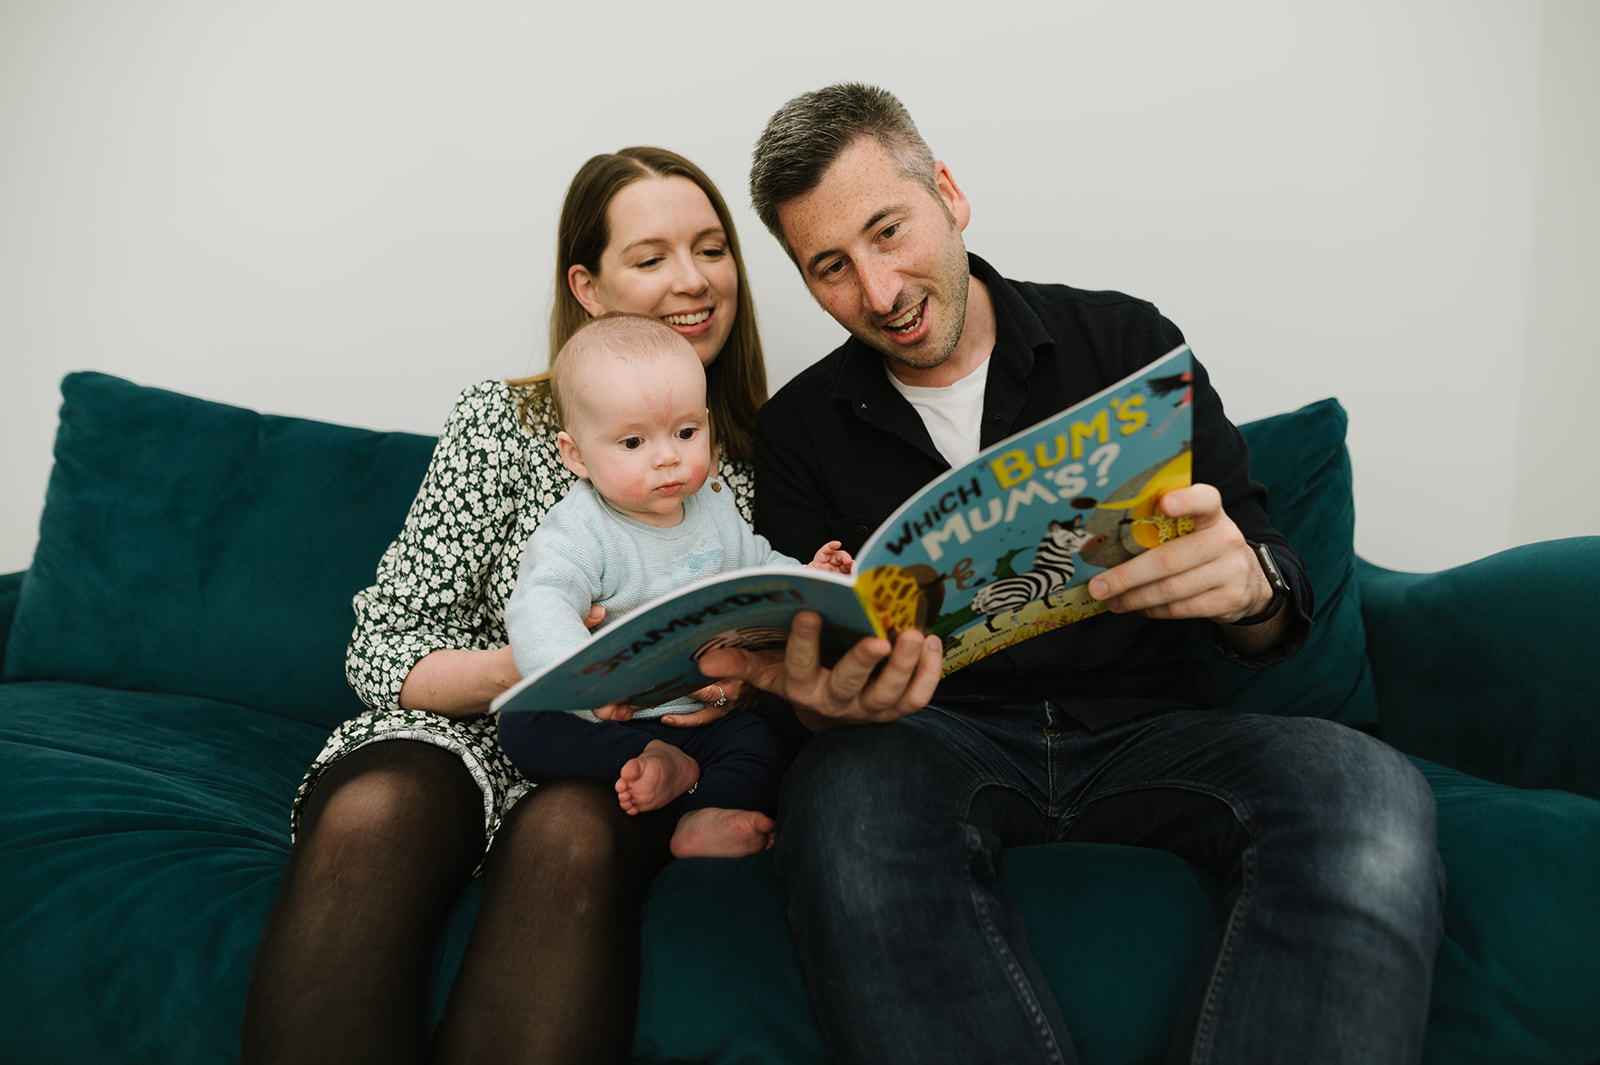 mum, dad and baby reading a book together on a blue sofa 